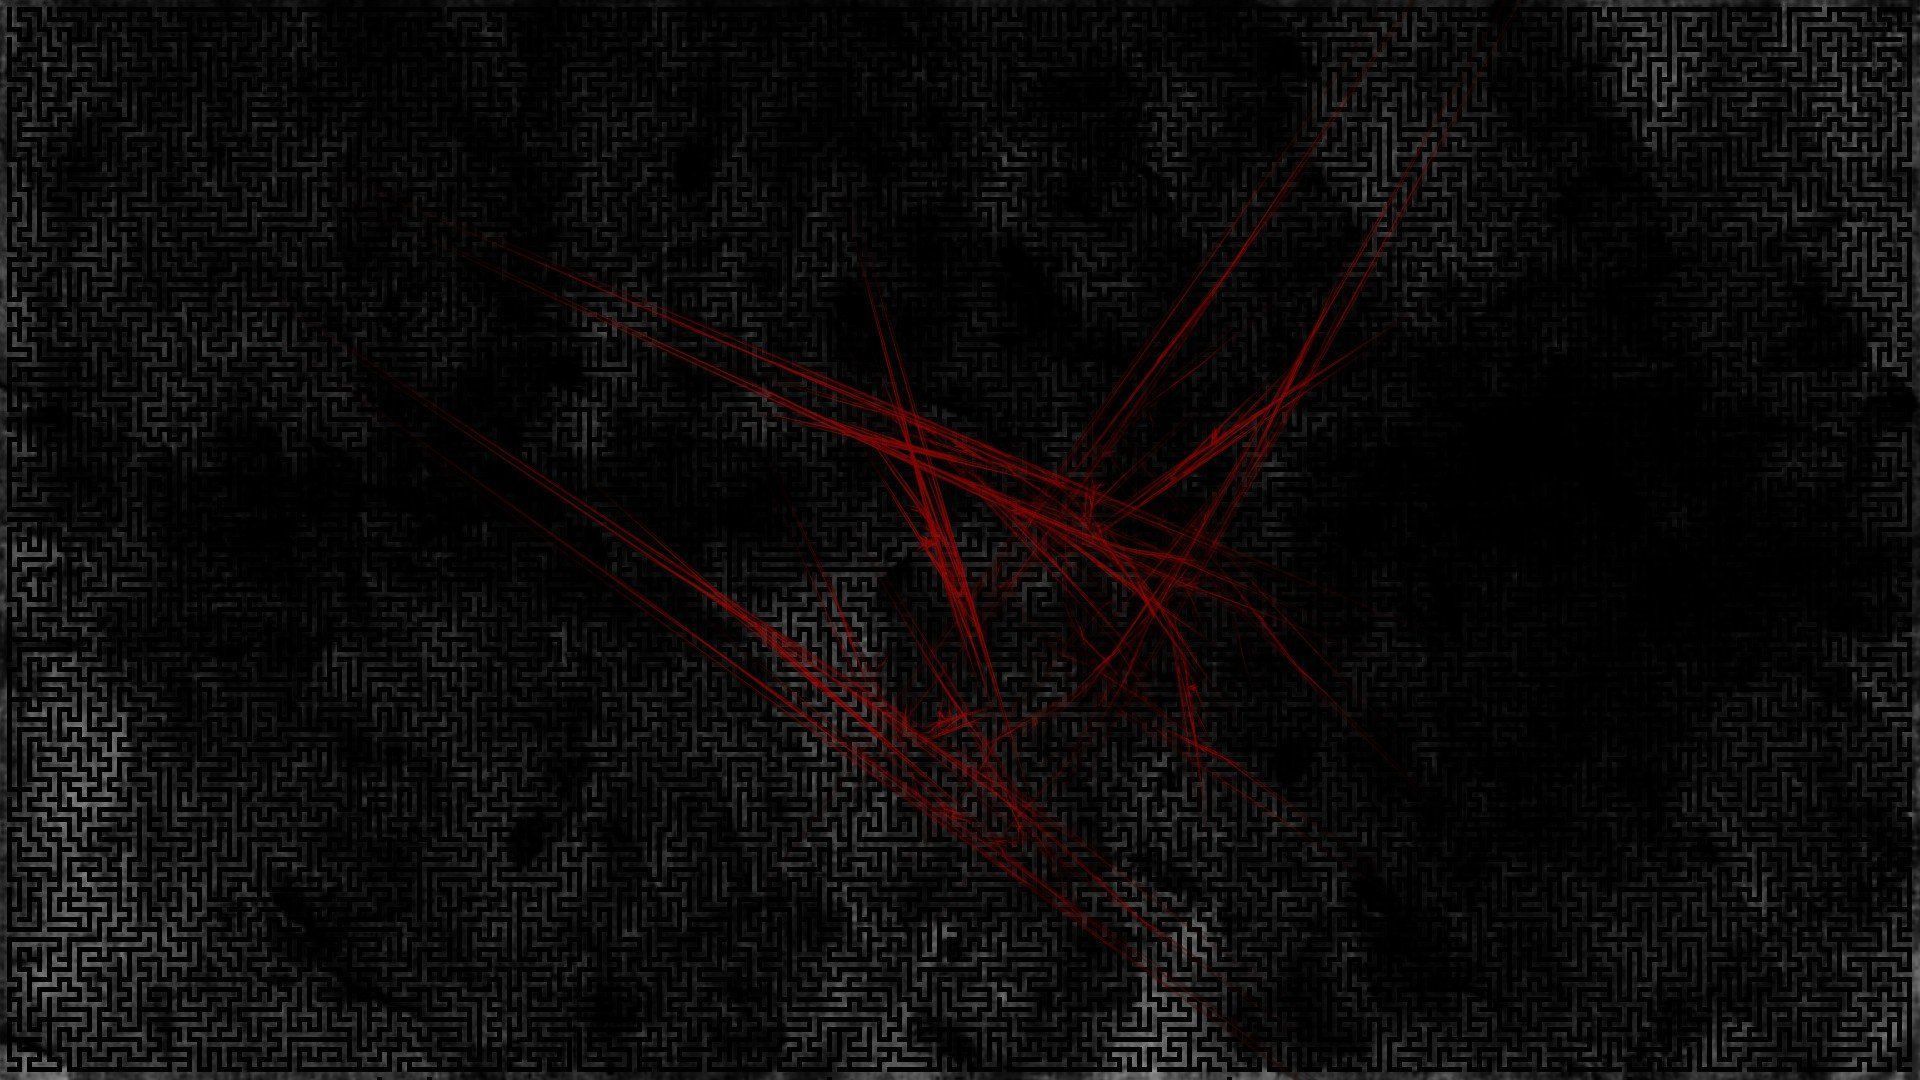 Abstract black red Labyrinth wallpaper 1920x1080 289817